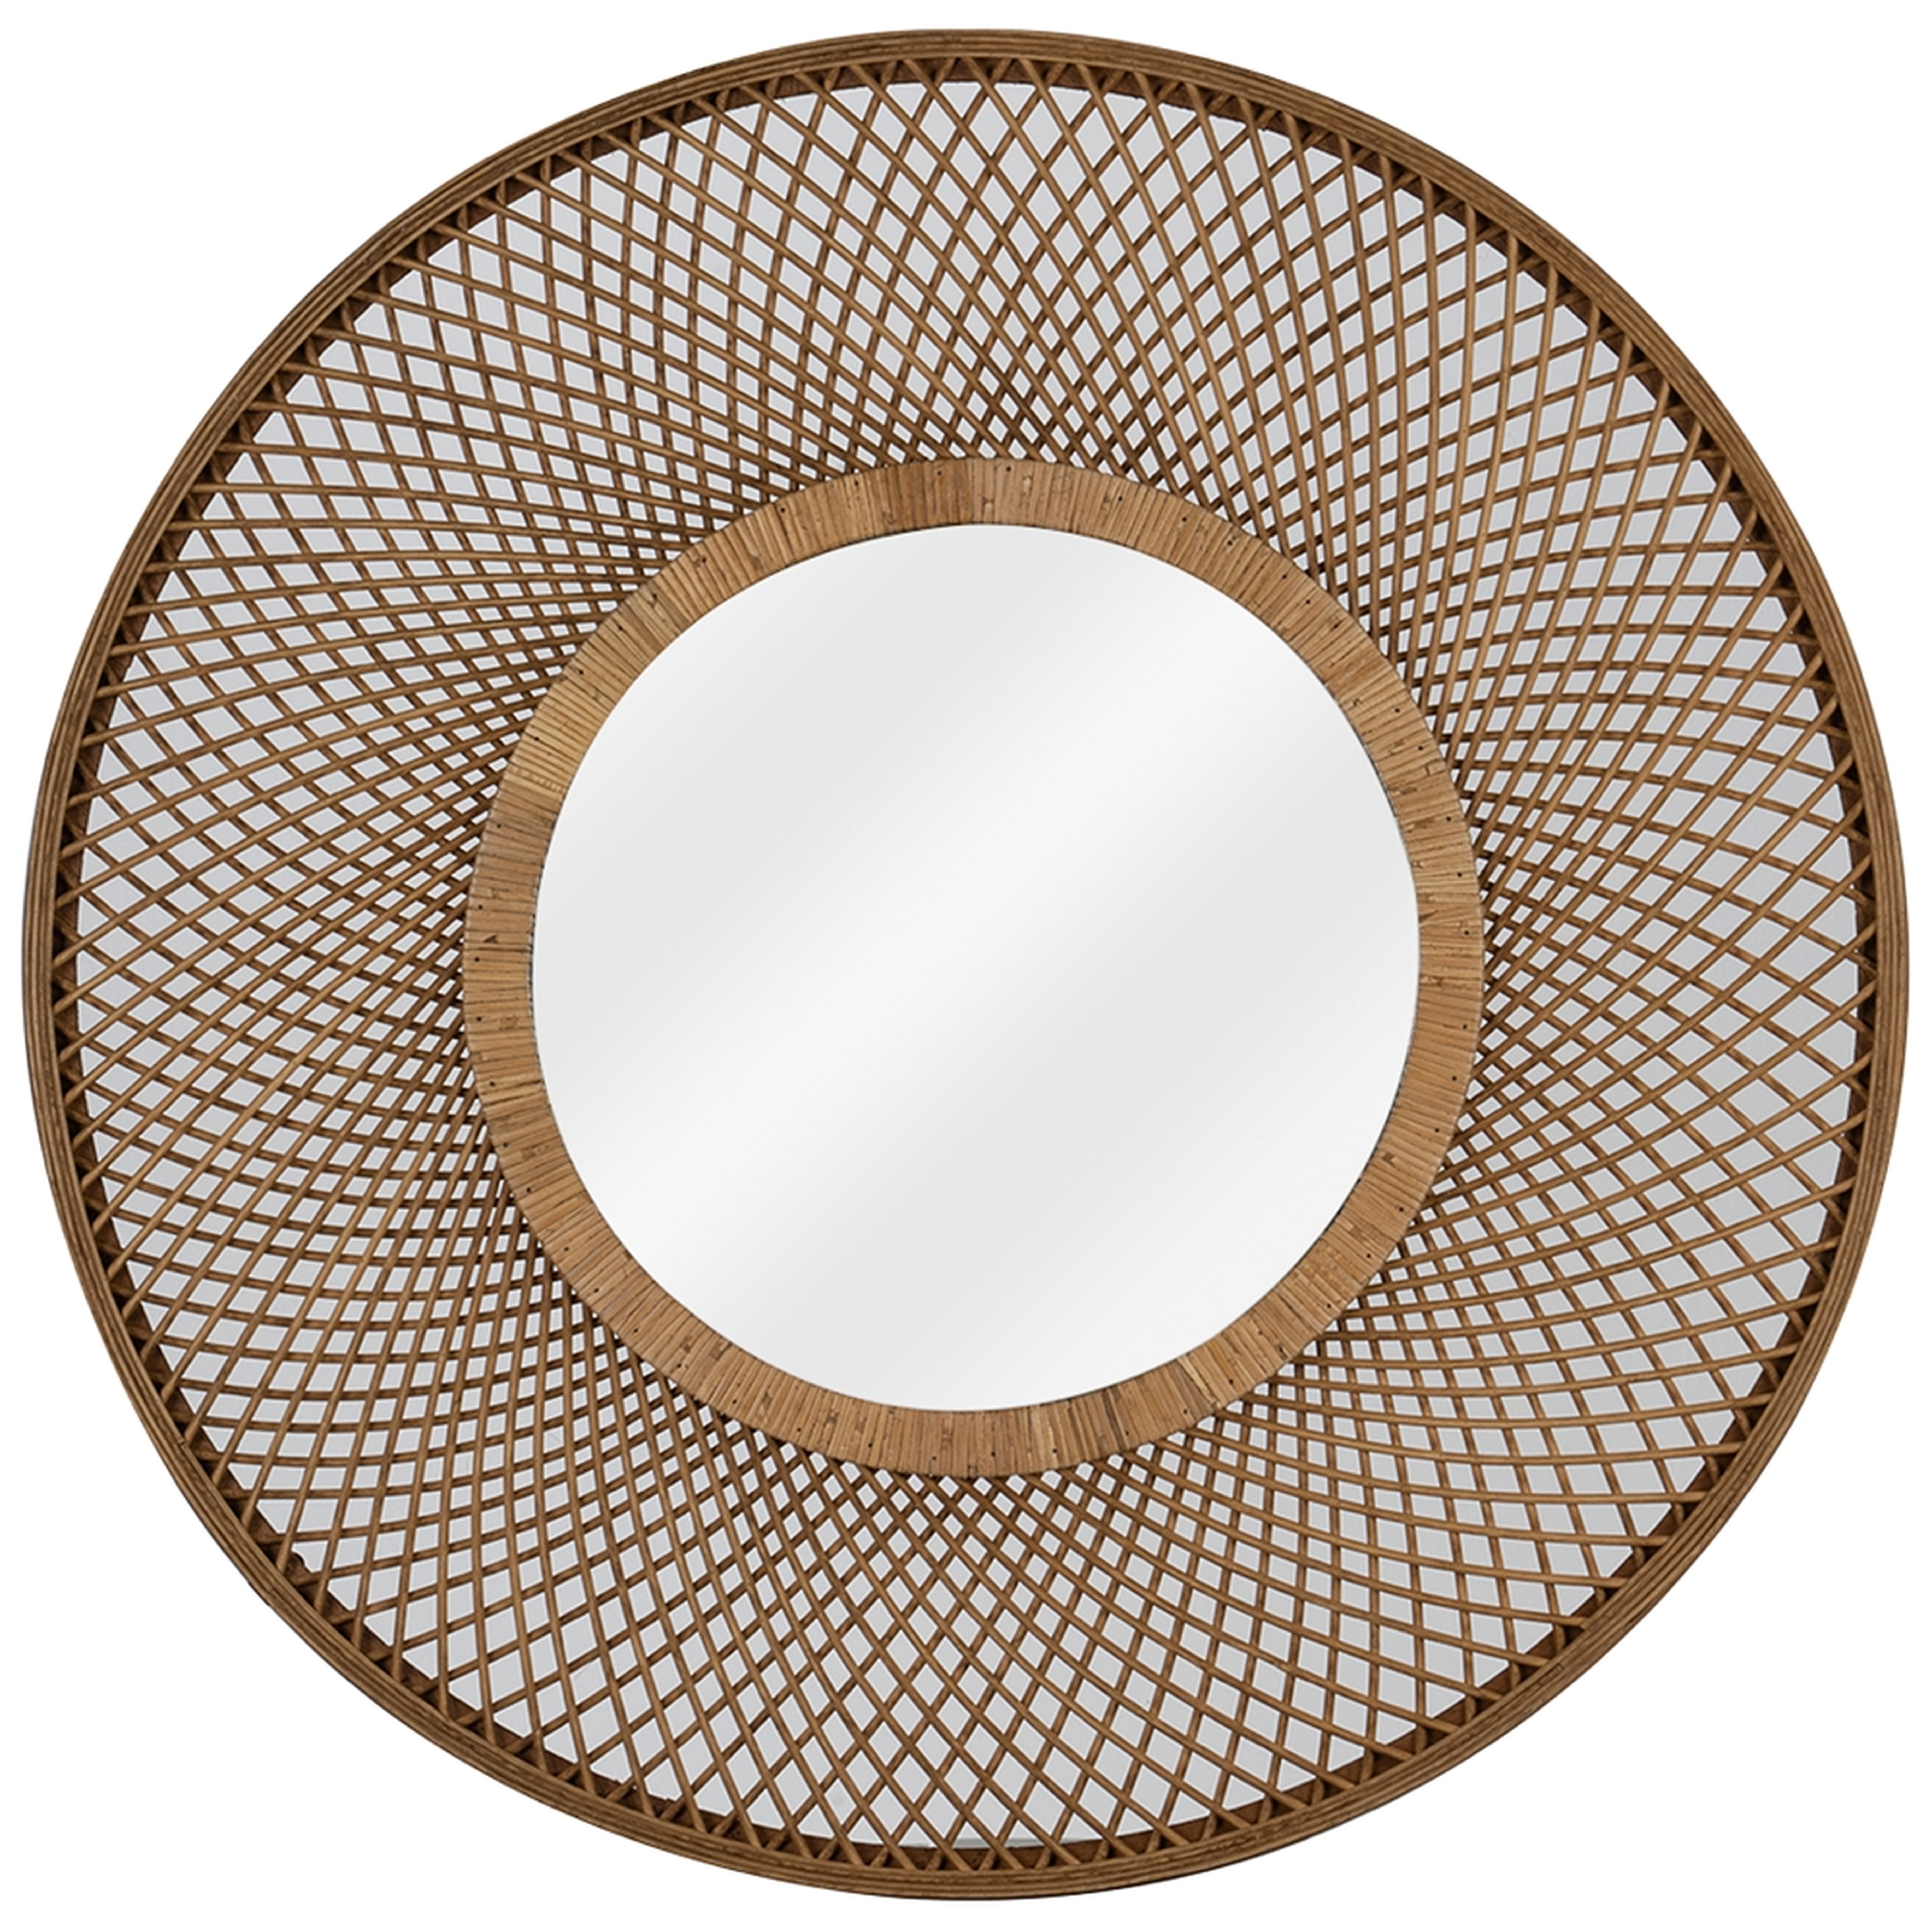 Hamptons Natural Brown Rattan 36" Round Wall Mirror - Style # 79A52 - Lamps Plus